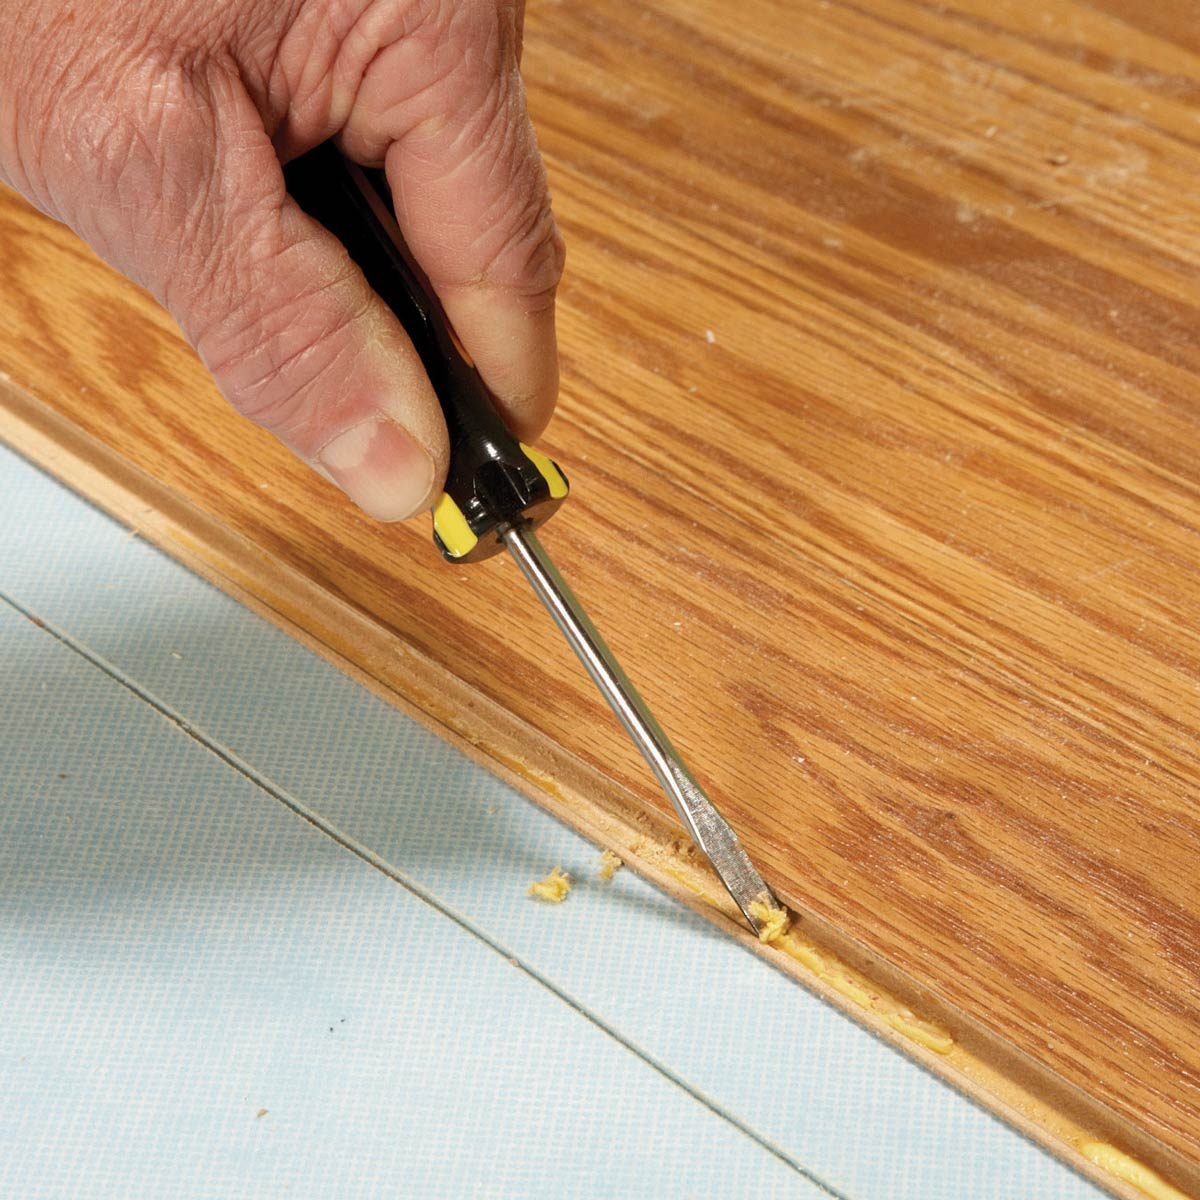 remove glue from planks